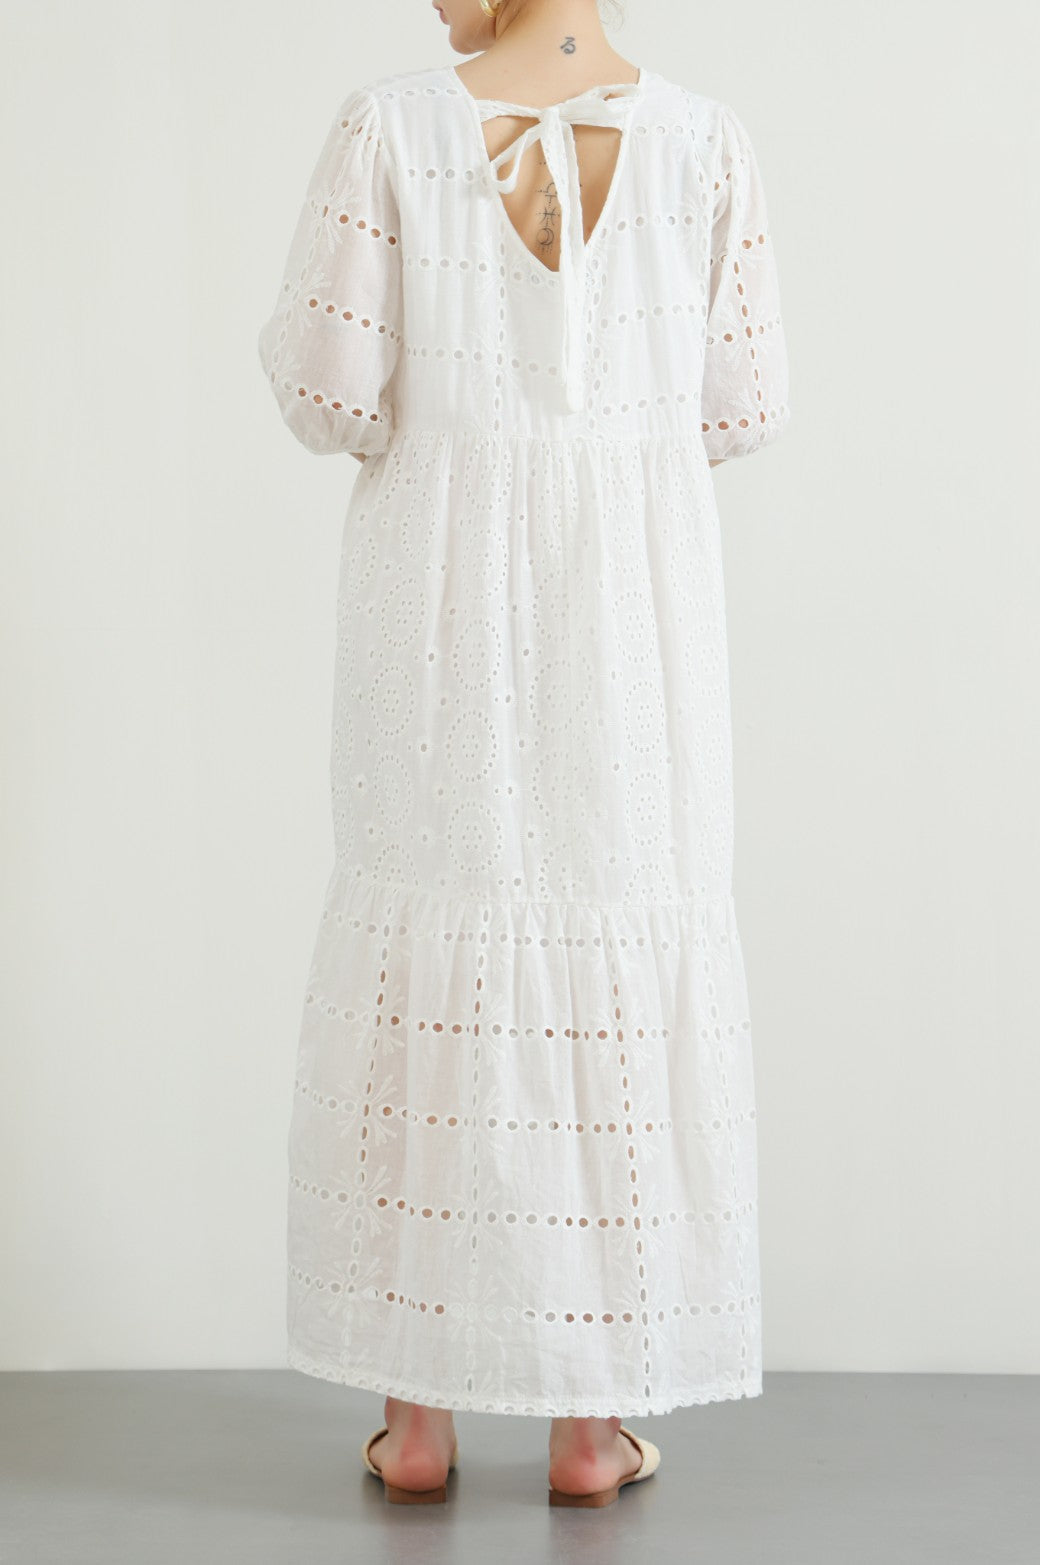 WHITE EMBROIDERED TIER DRESS